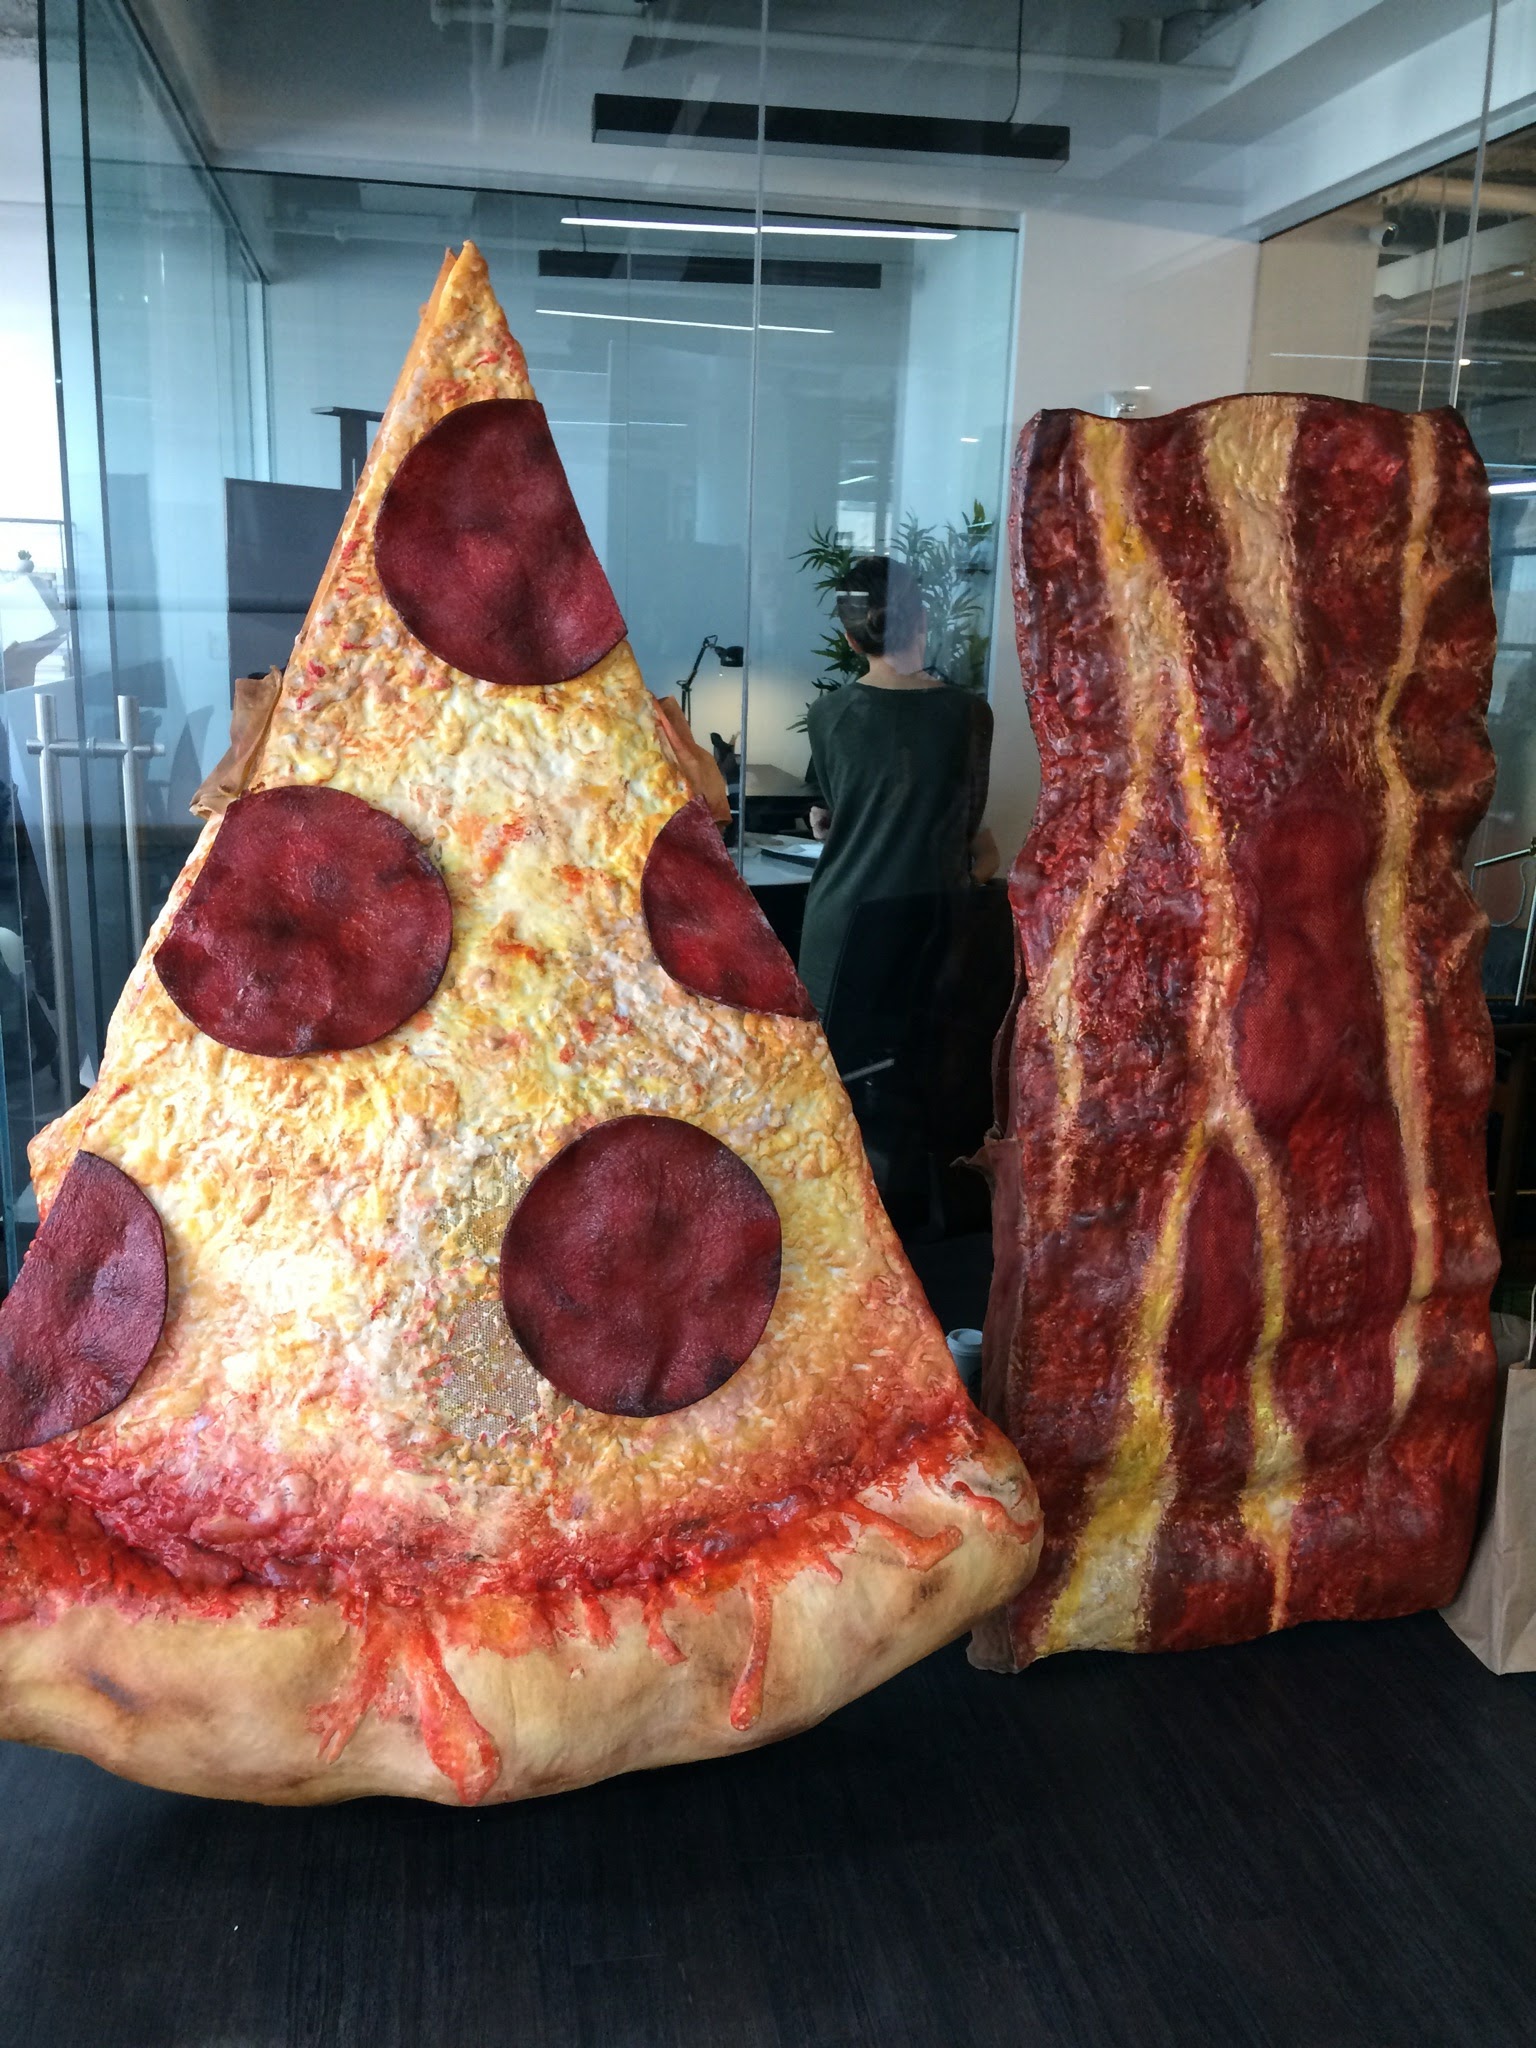  Shooting day - Pizza meets Bacon 